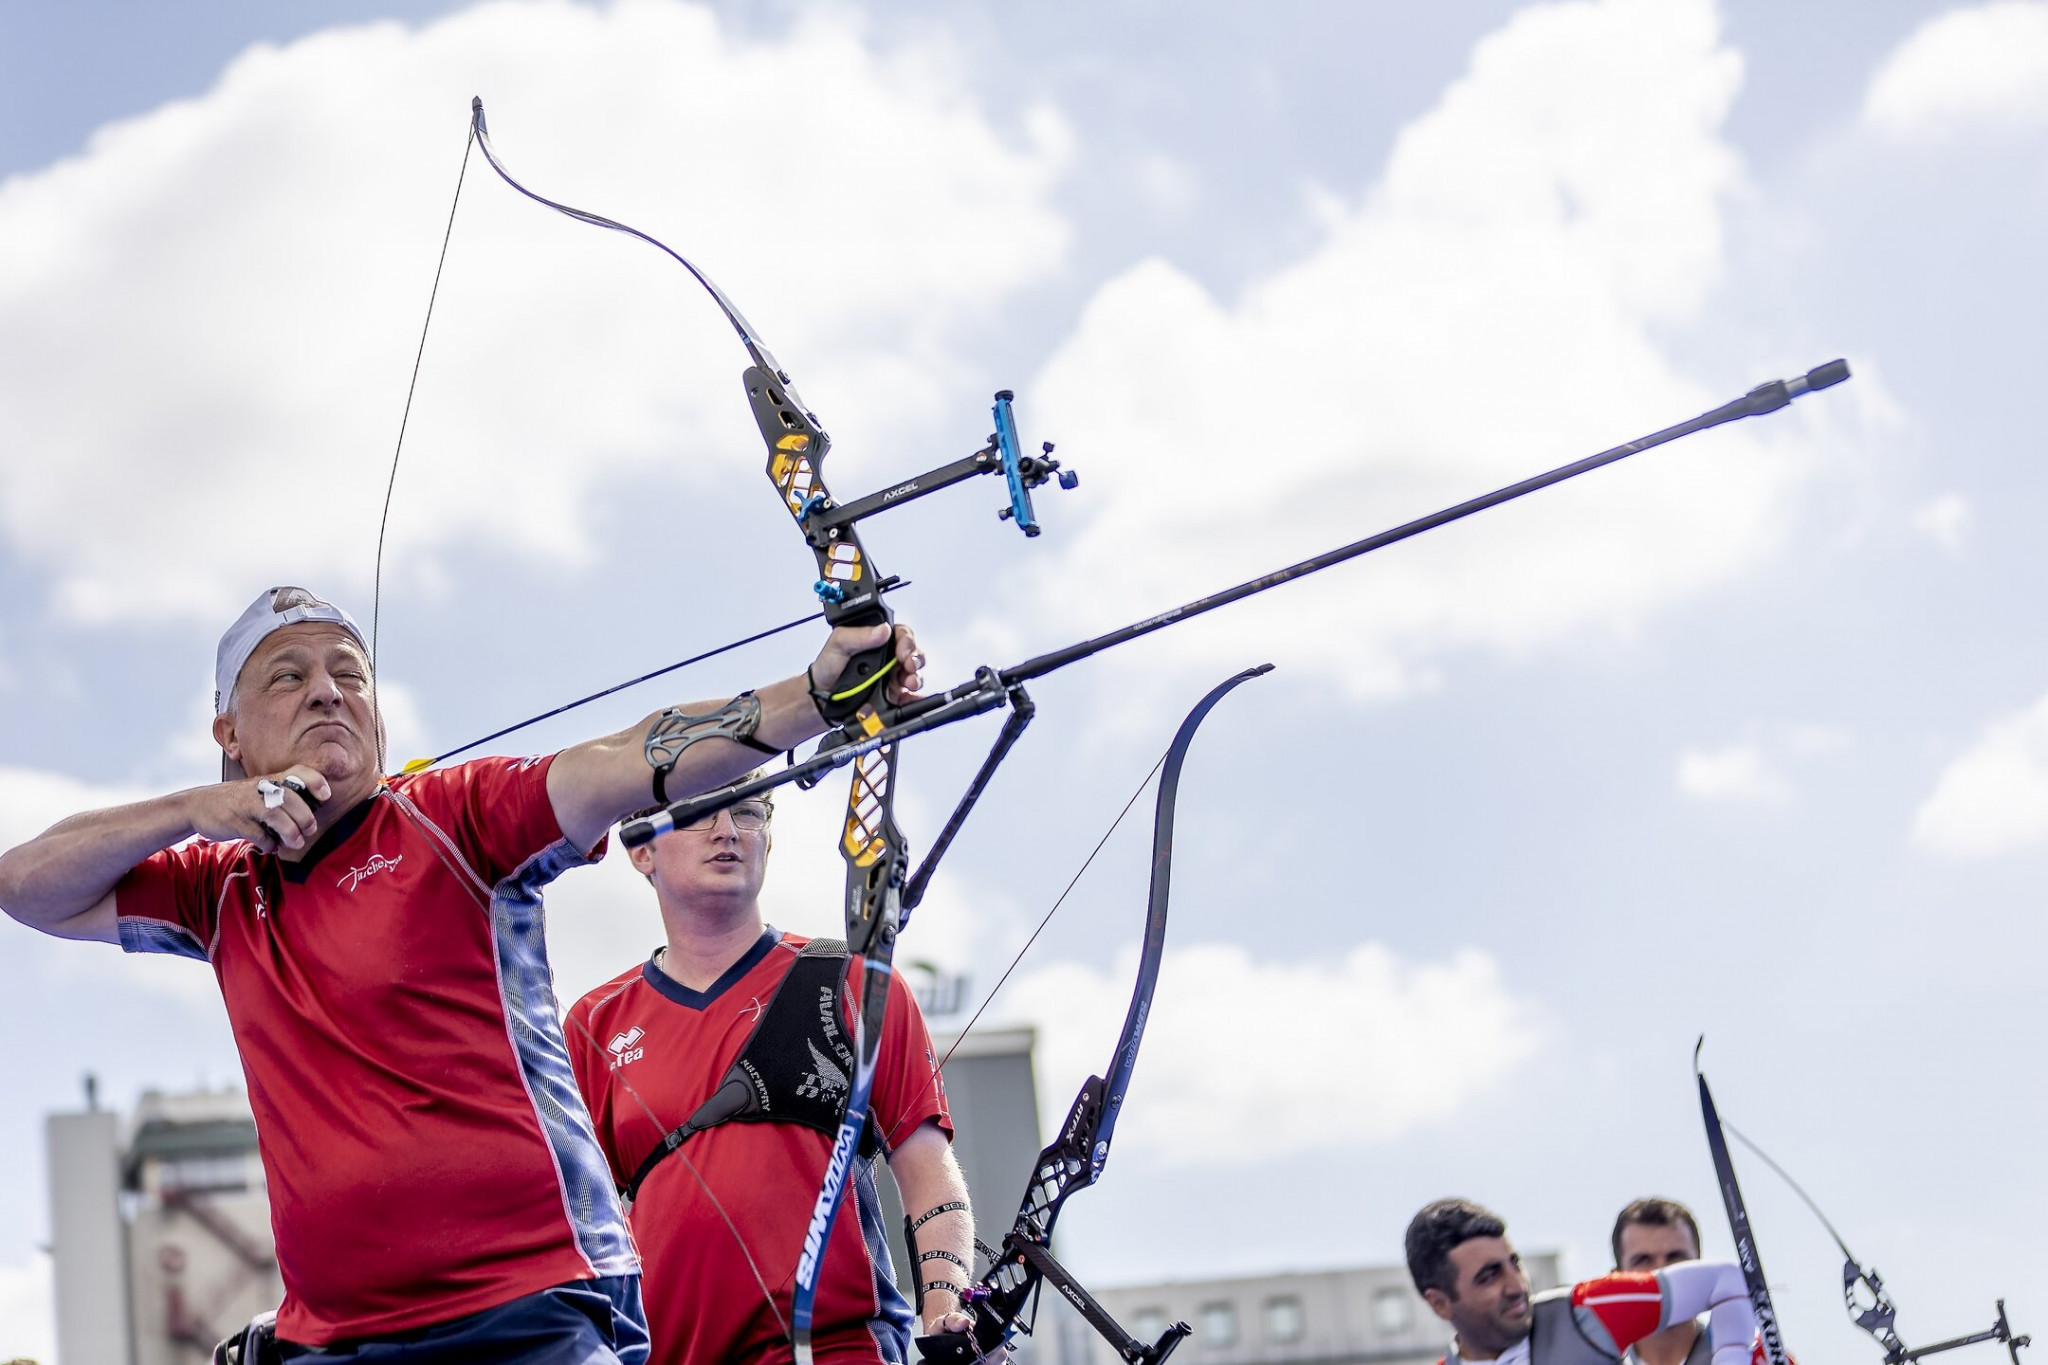 British duo David Phillips and Cameron Radigan emerged victorious from the men’s recurve open doubles final ©EPC